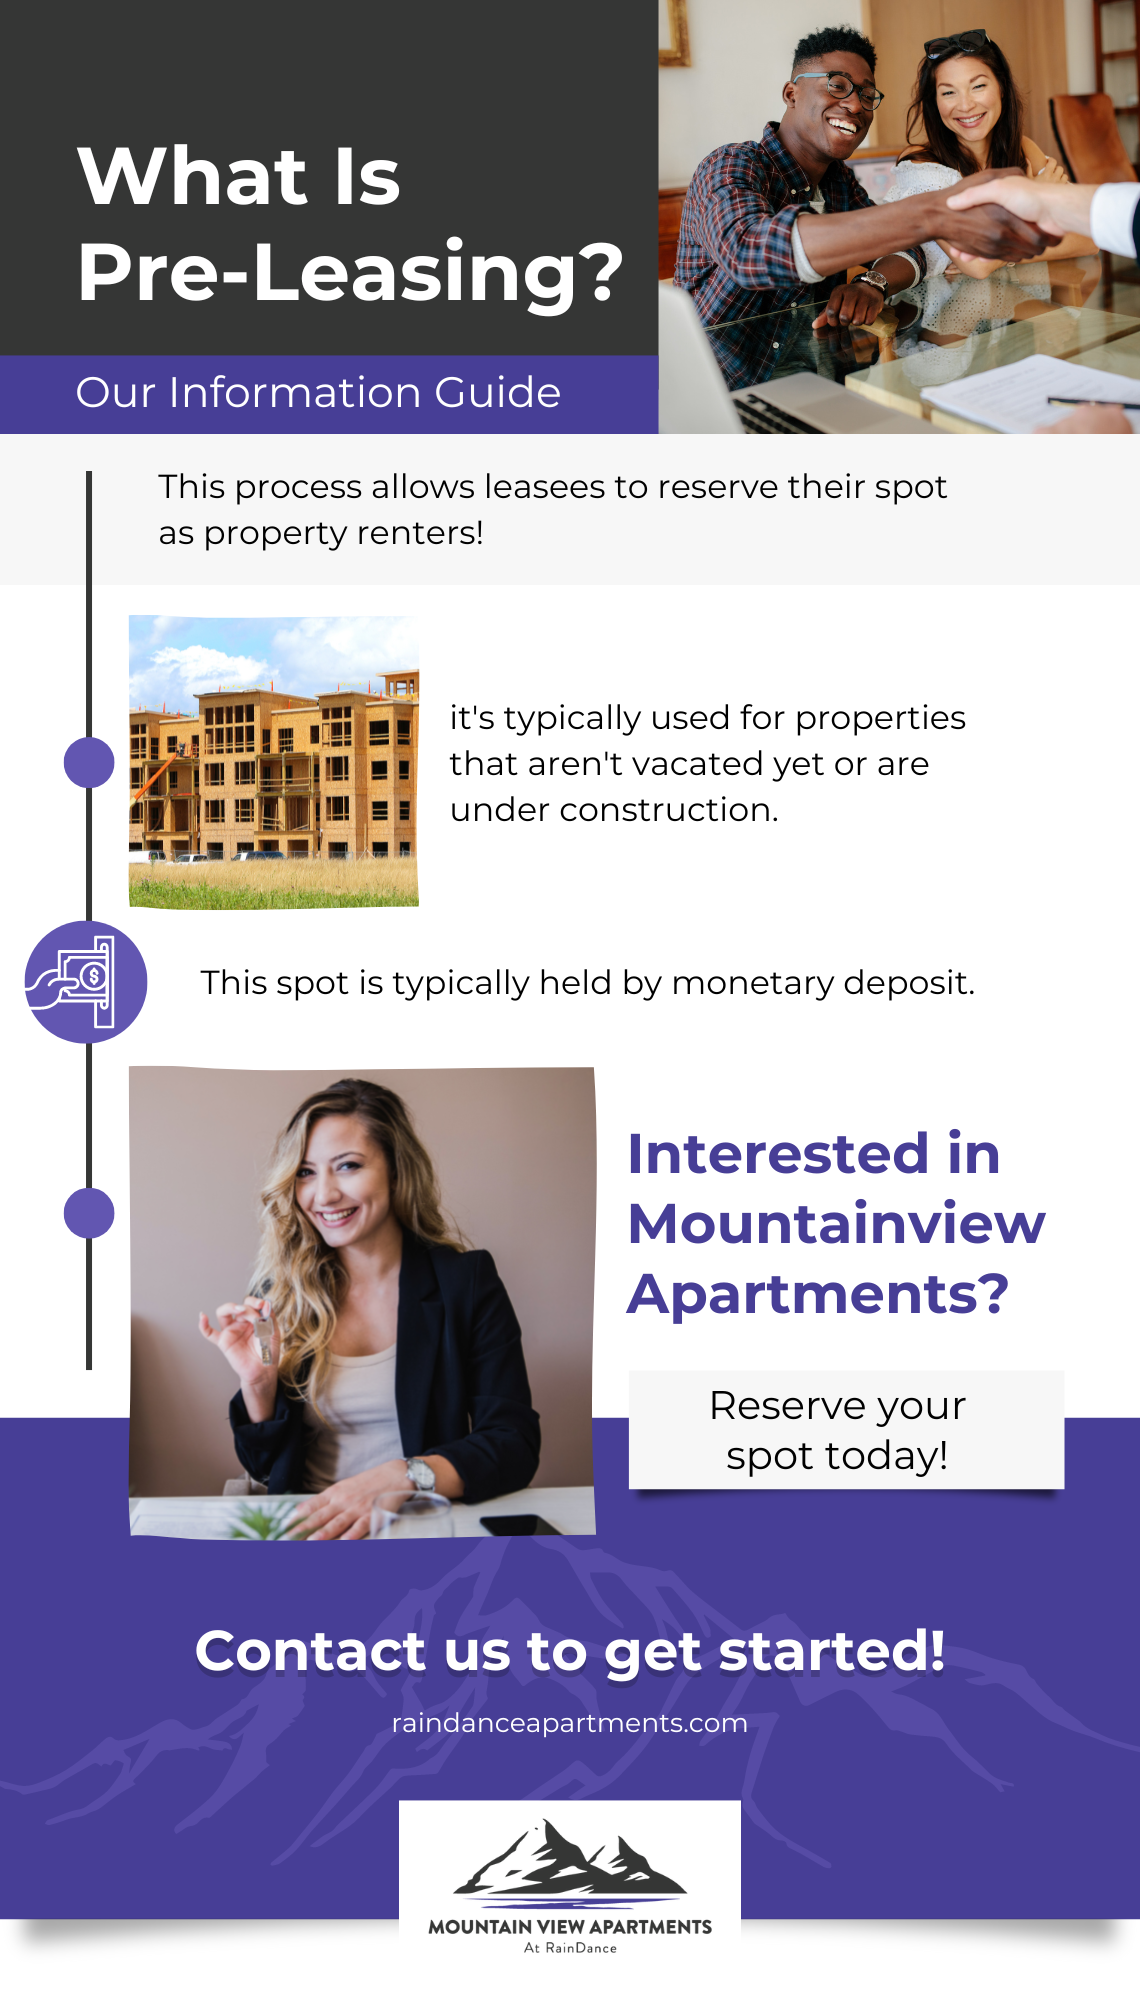 M33001_IG_What Is Pre-Leasing Our Information Guide.png